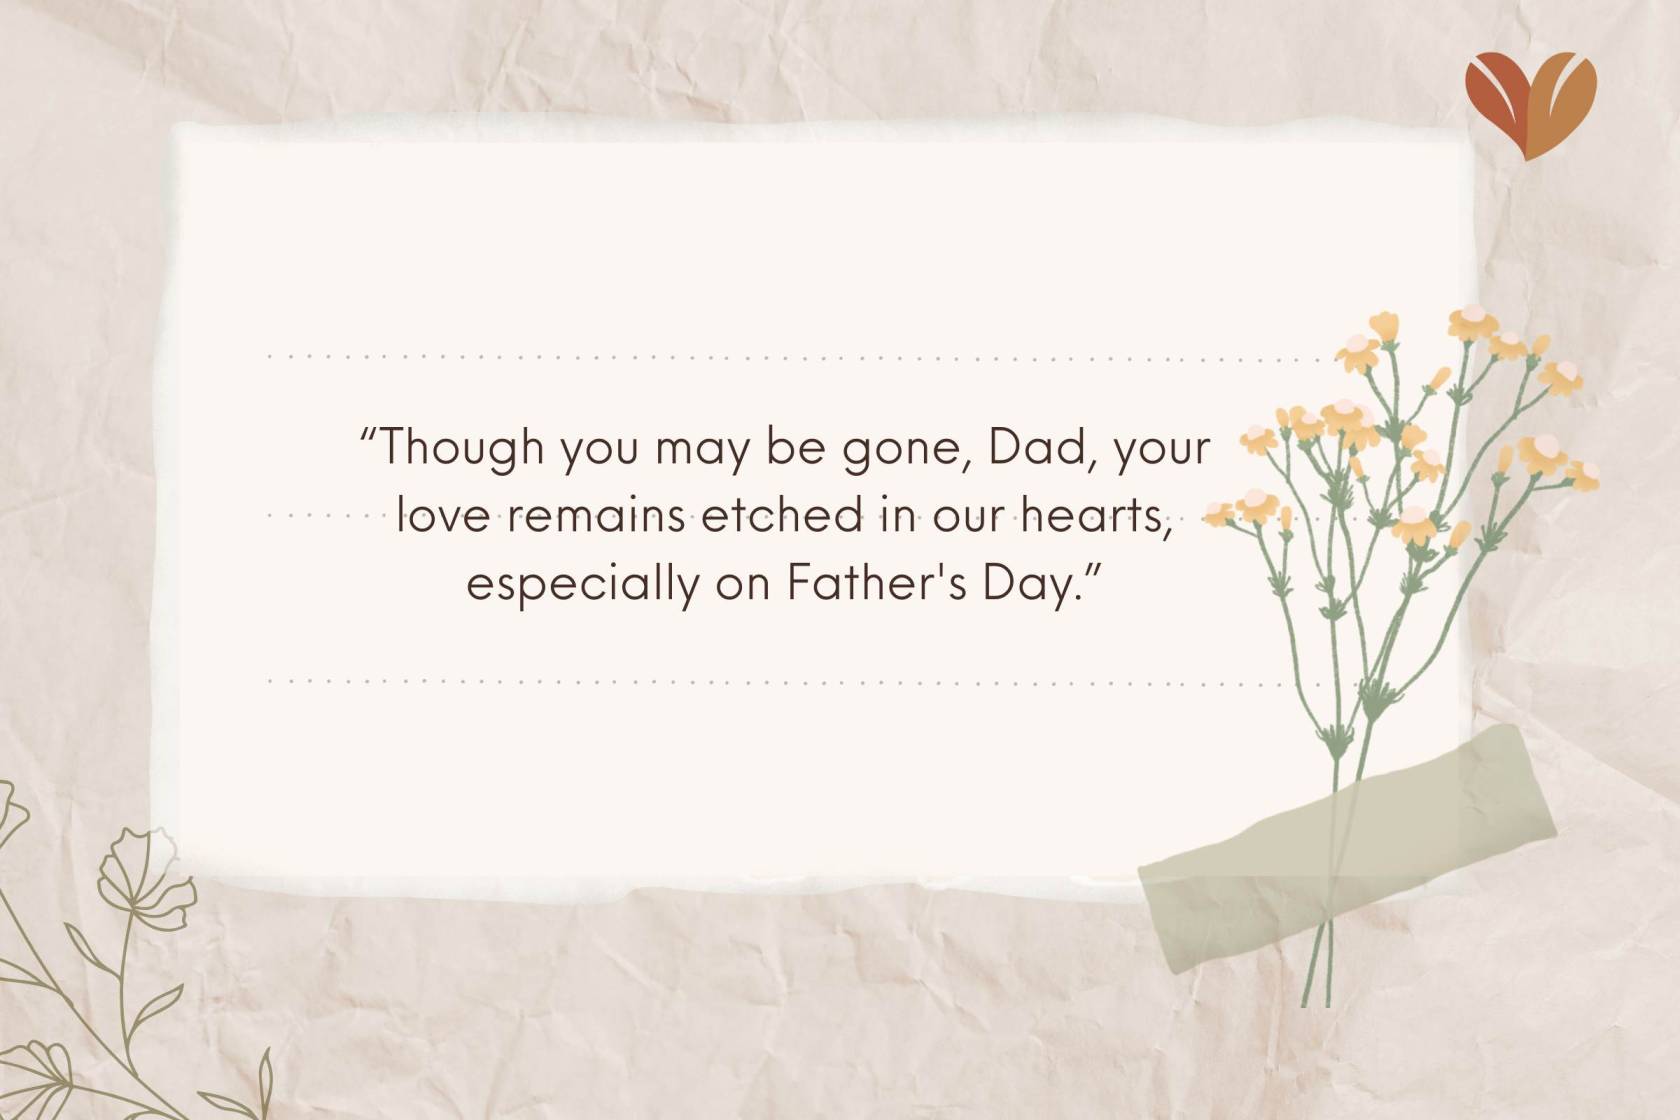 Best Father's Day Wishes for Dad In Heaven